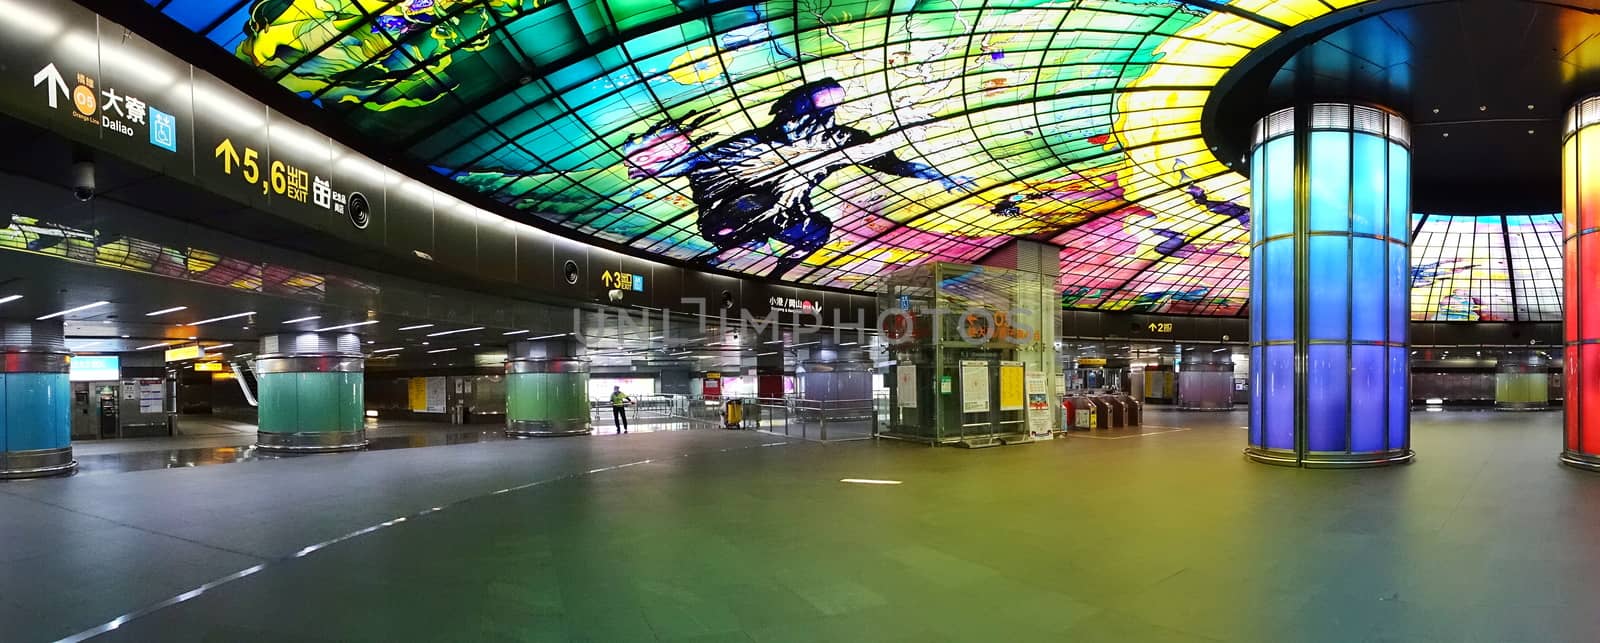 KAOHSIUNG, TAIWAN -- SEPTEMBER 13, 2018: The concourse of the Formosa Boulevard Station of the Kaohsiung MRT features a large public art glass installation.
